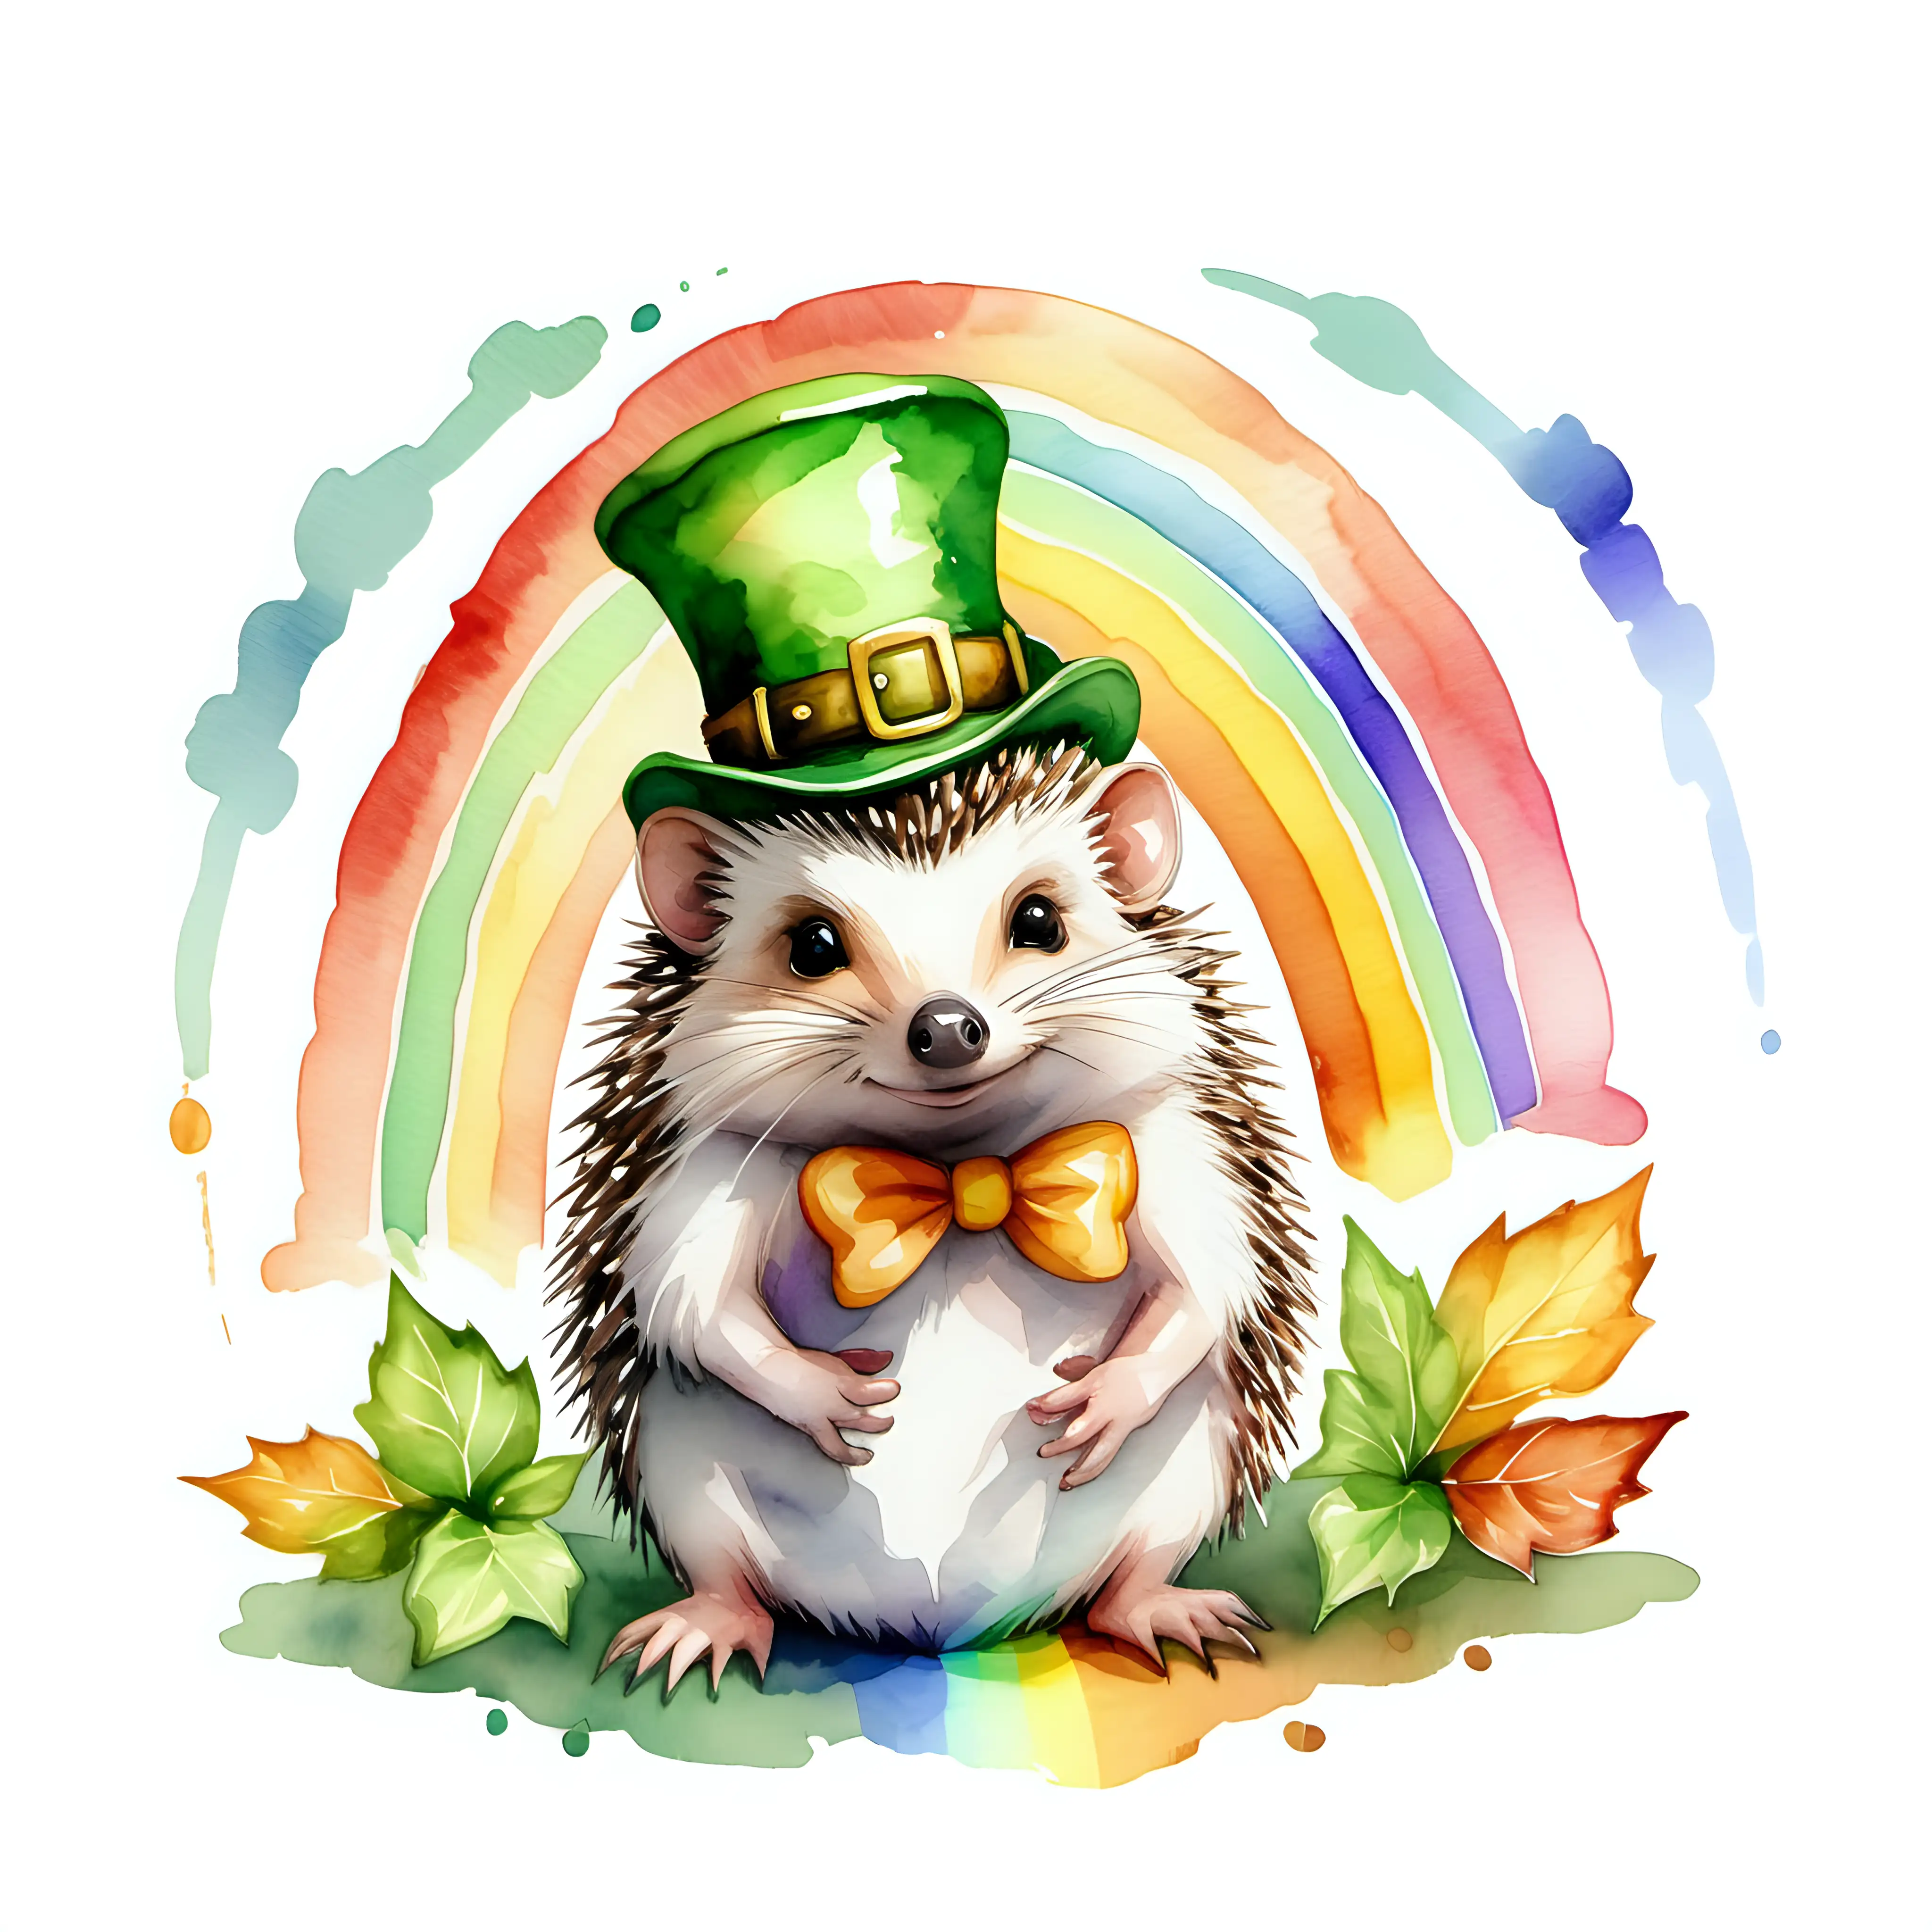 watercolor style, a leprechaun hedgehog in front of a rainbow on a white background.